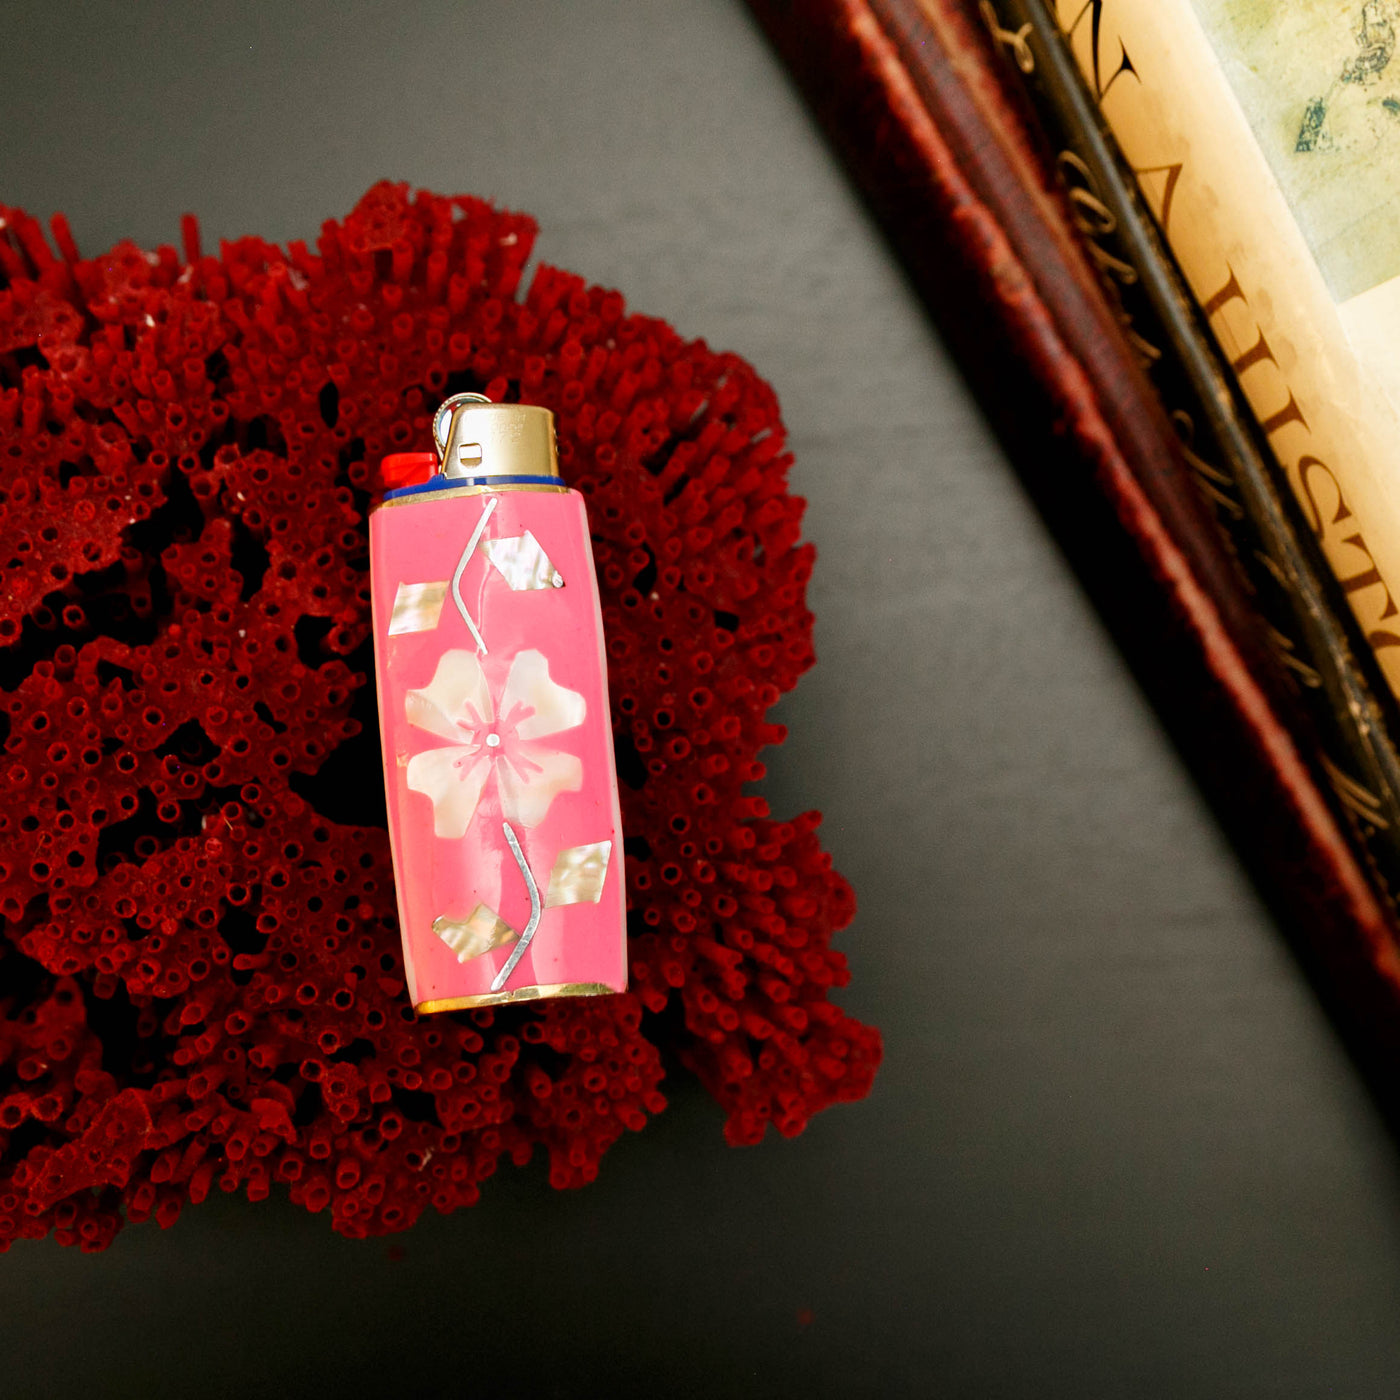 Light Pink Flower Vintage Lighter Case from the Saint Claude Social Club Vintage Collection and home goods section.